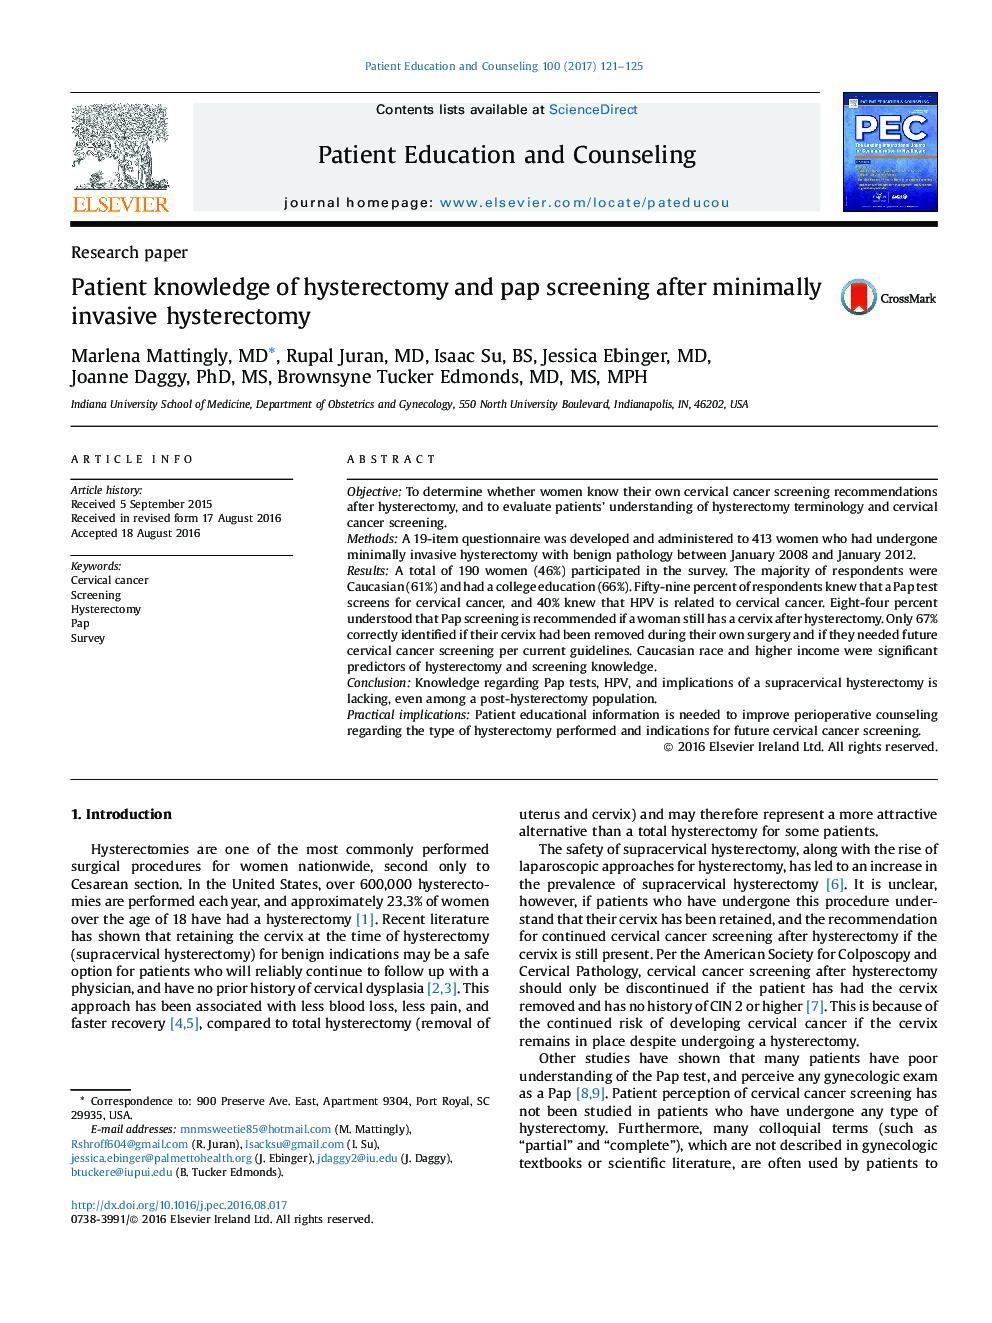 Patient knowledge of hysterectomy and pap screening after minimally invasive hysterectomy